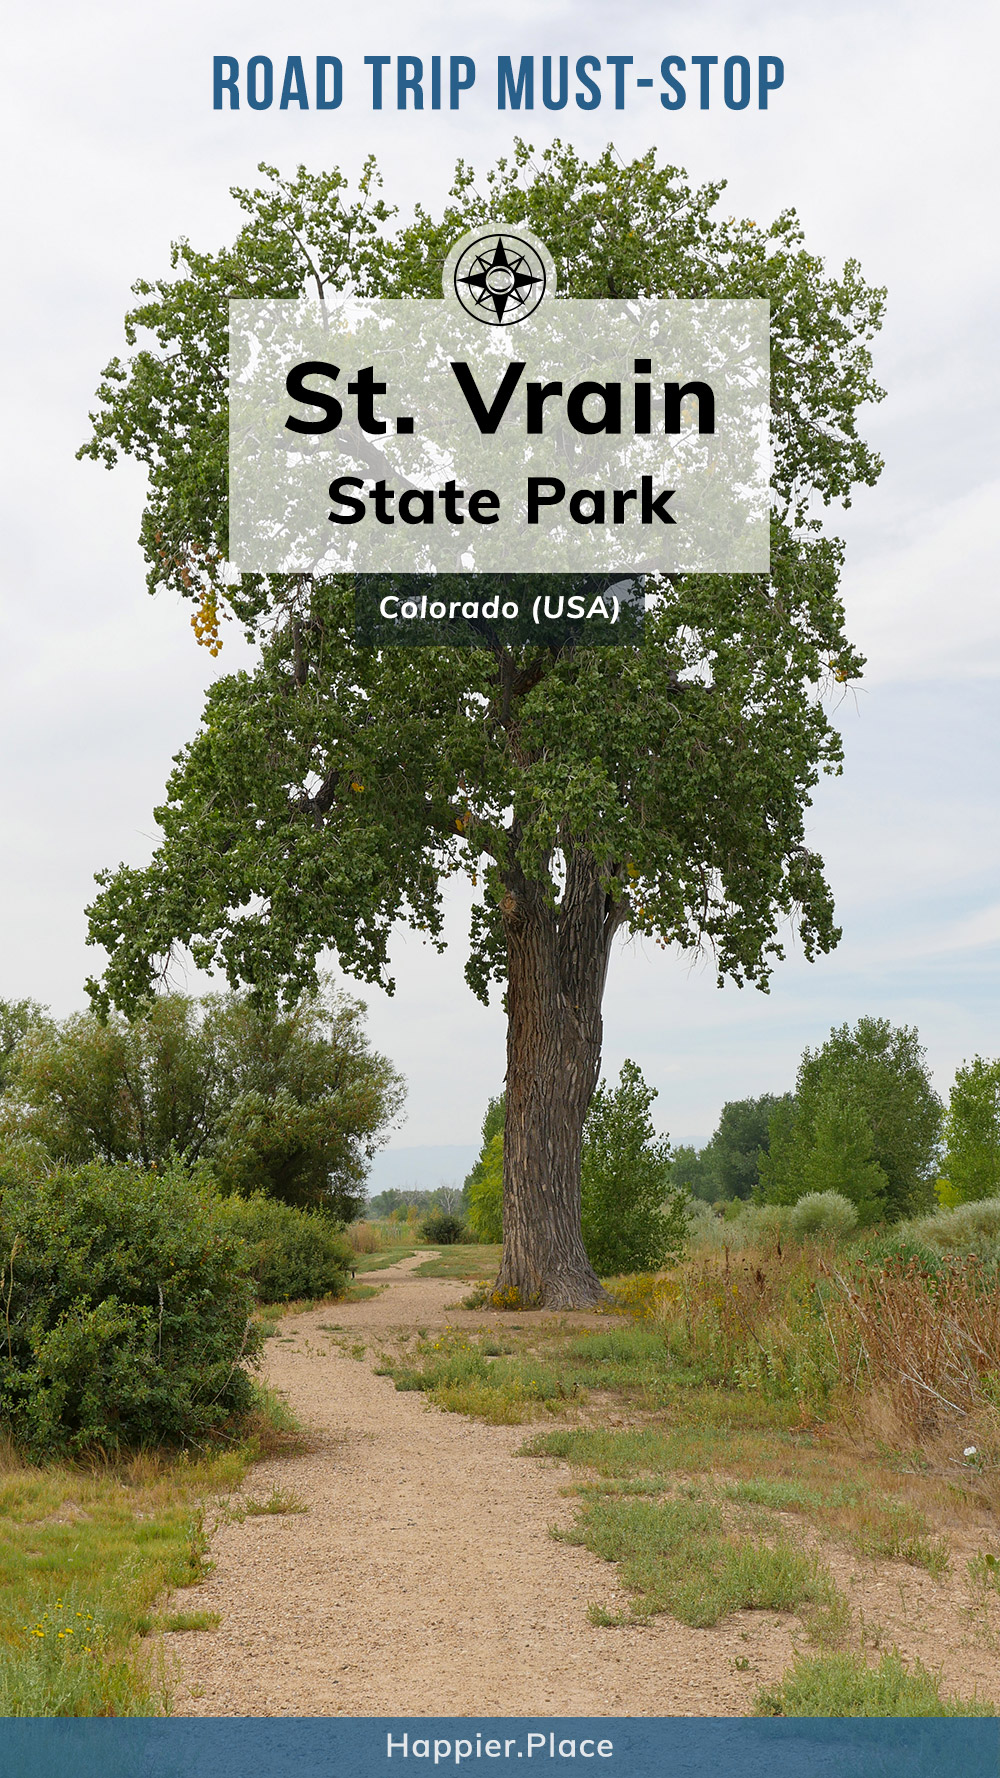 St. Vrain State Park, road trip must-stop in Colorado along I-25 north of Denver